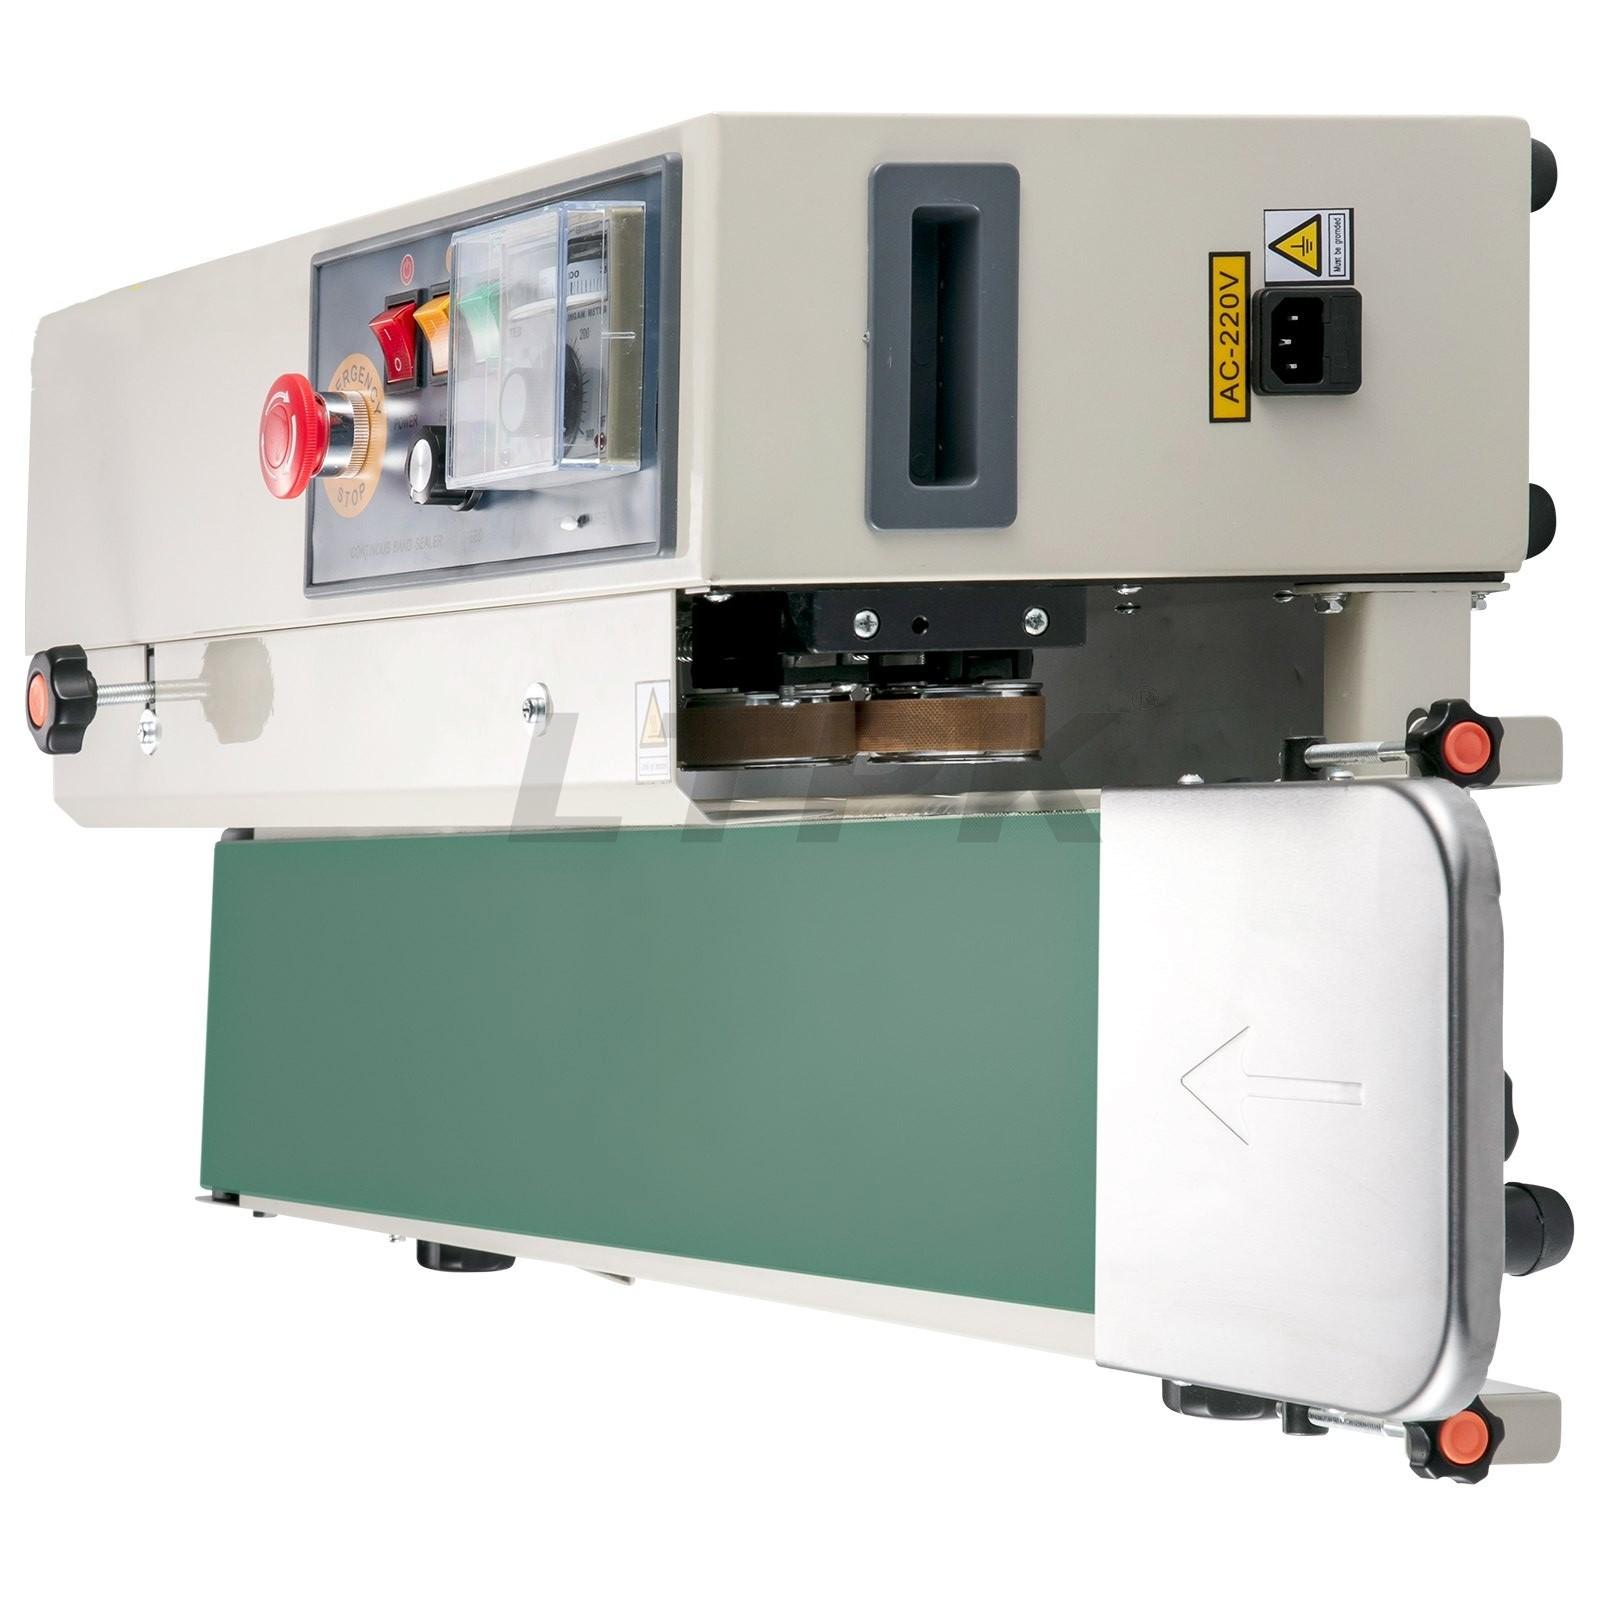 LTPK FR-770 Horizontal Continuous Band Sealer, Automatic Band Sealer with Digital Temperature Control